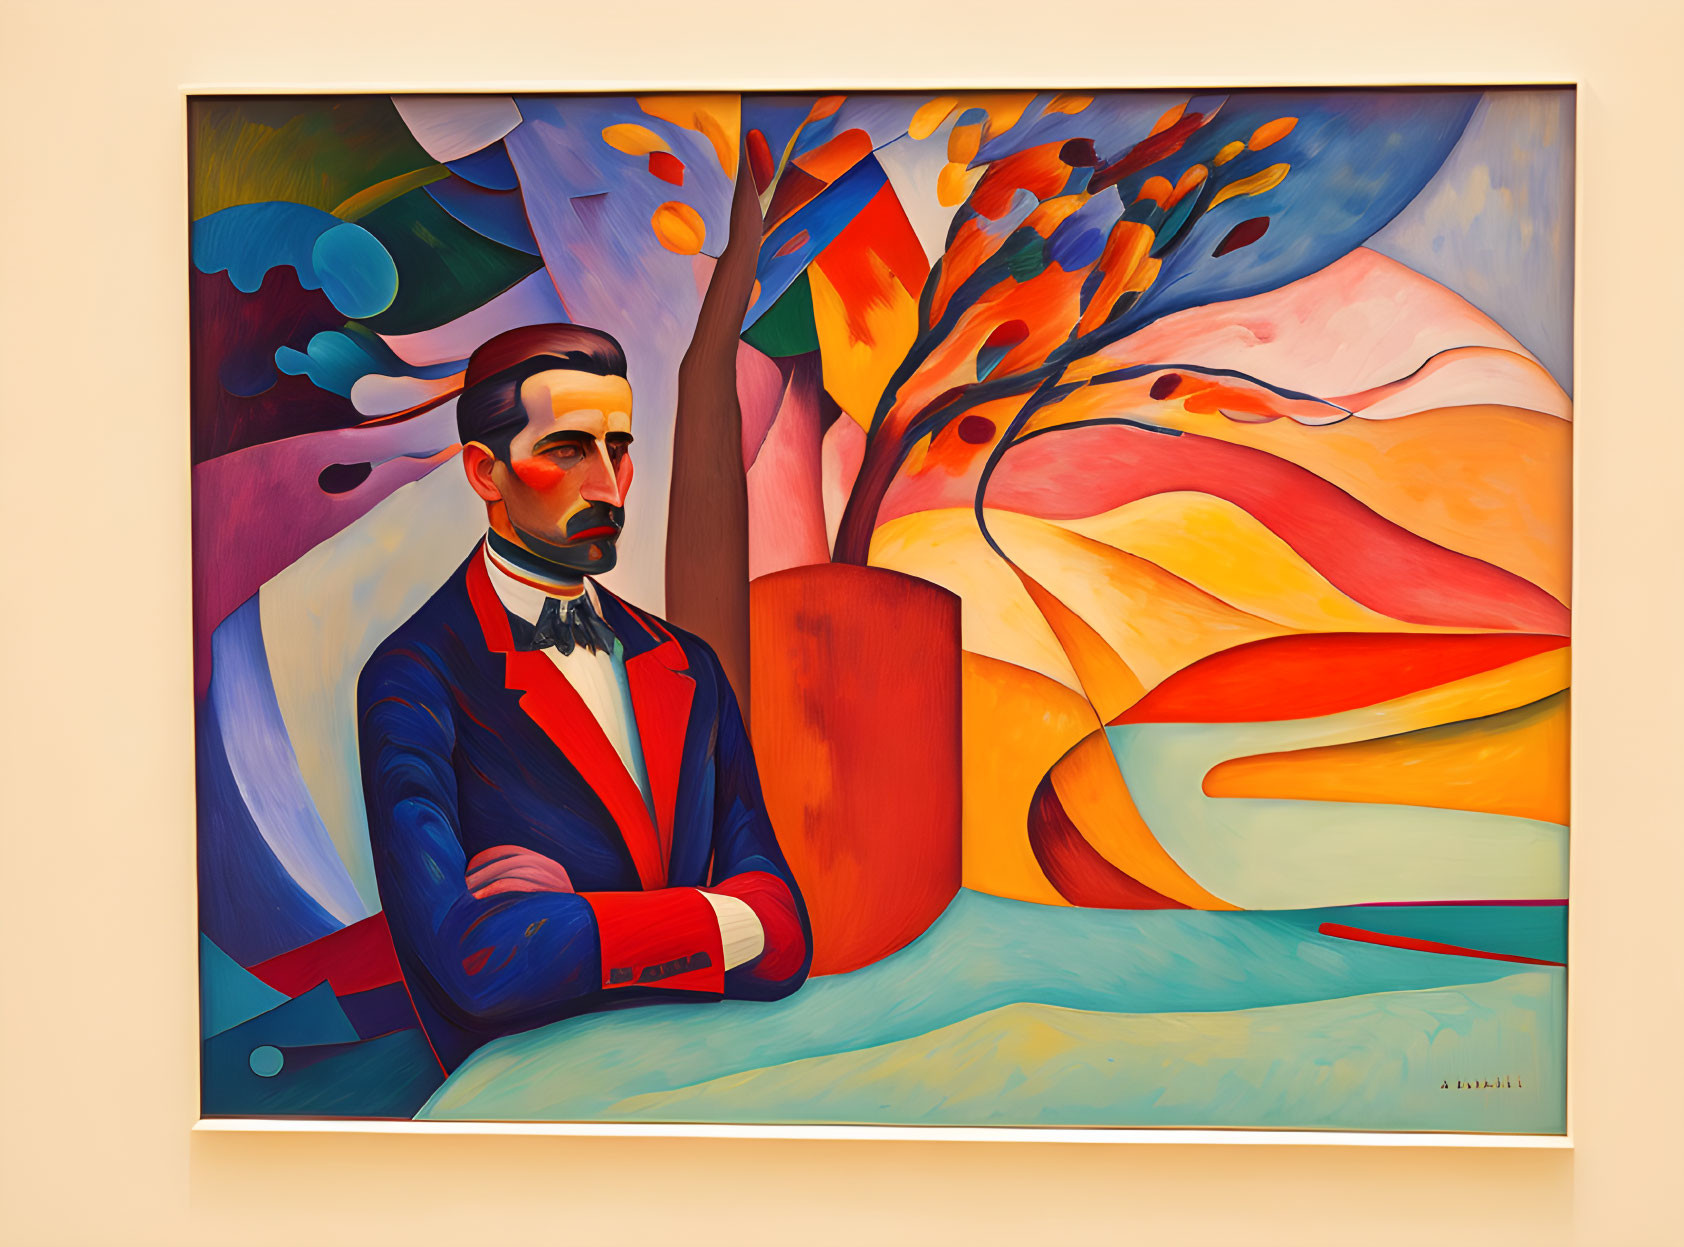 Colorful abstract painting: stern-faced man in suit with flowing landscape.